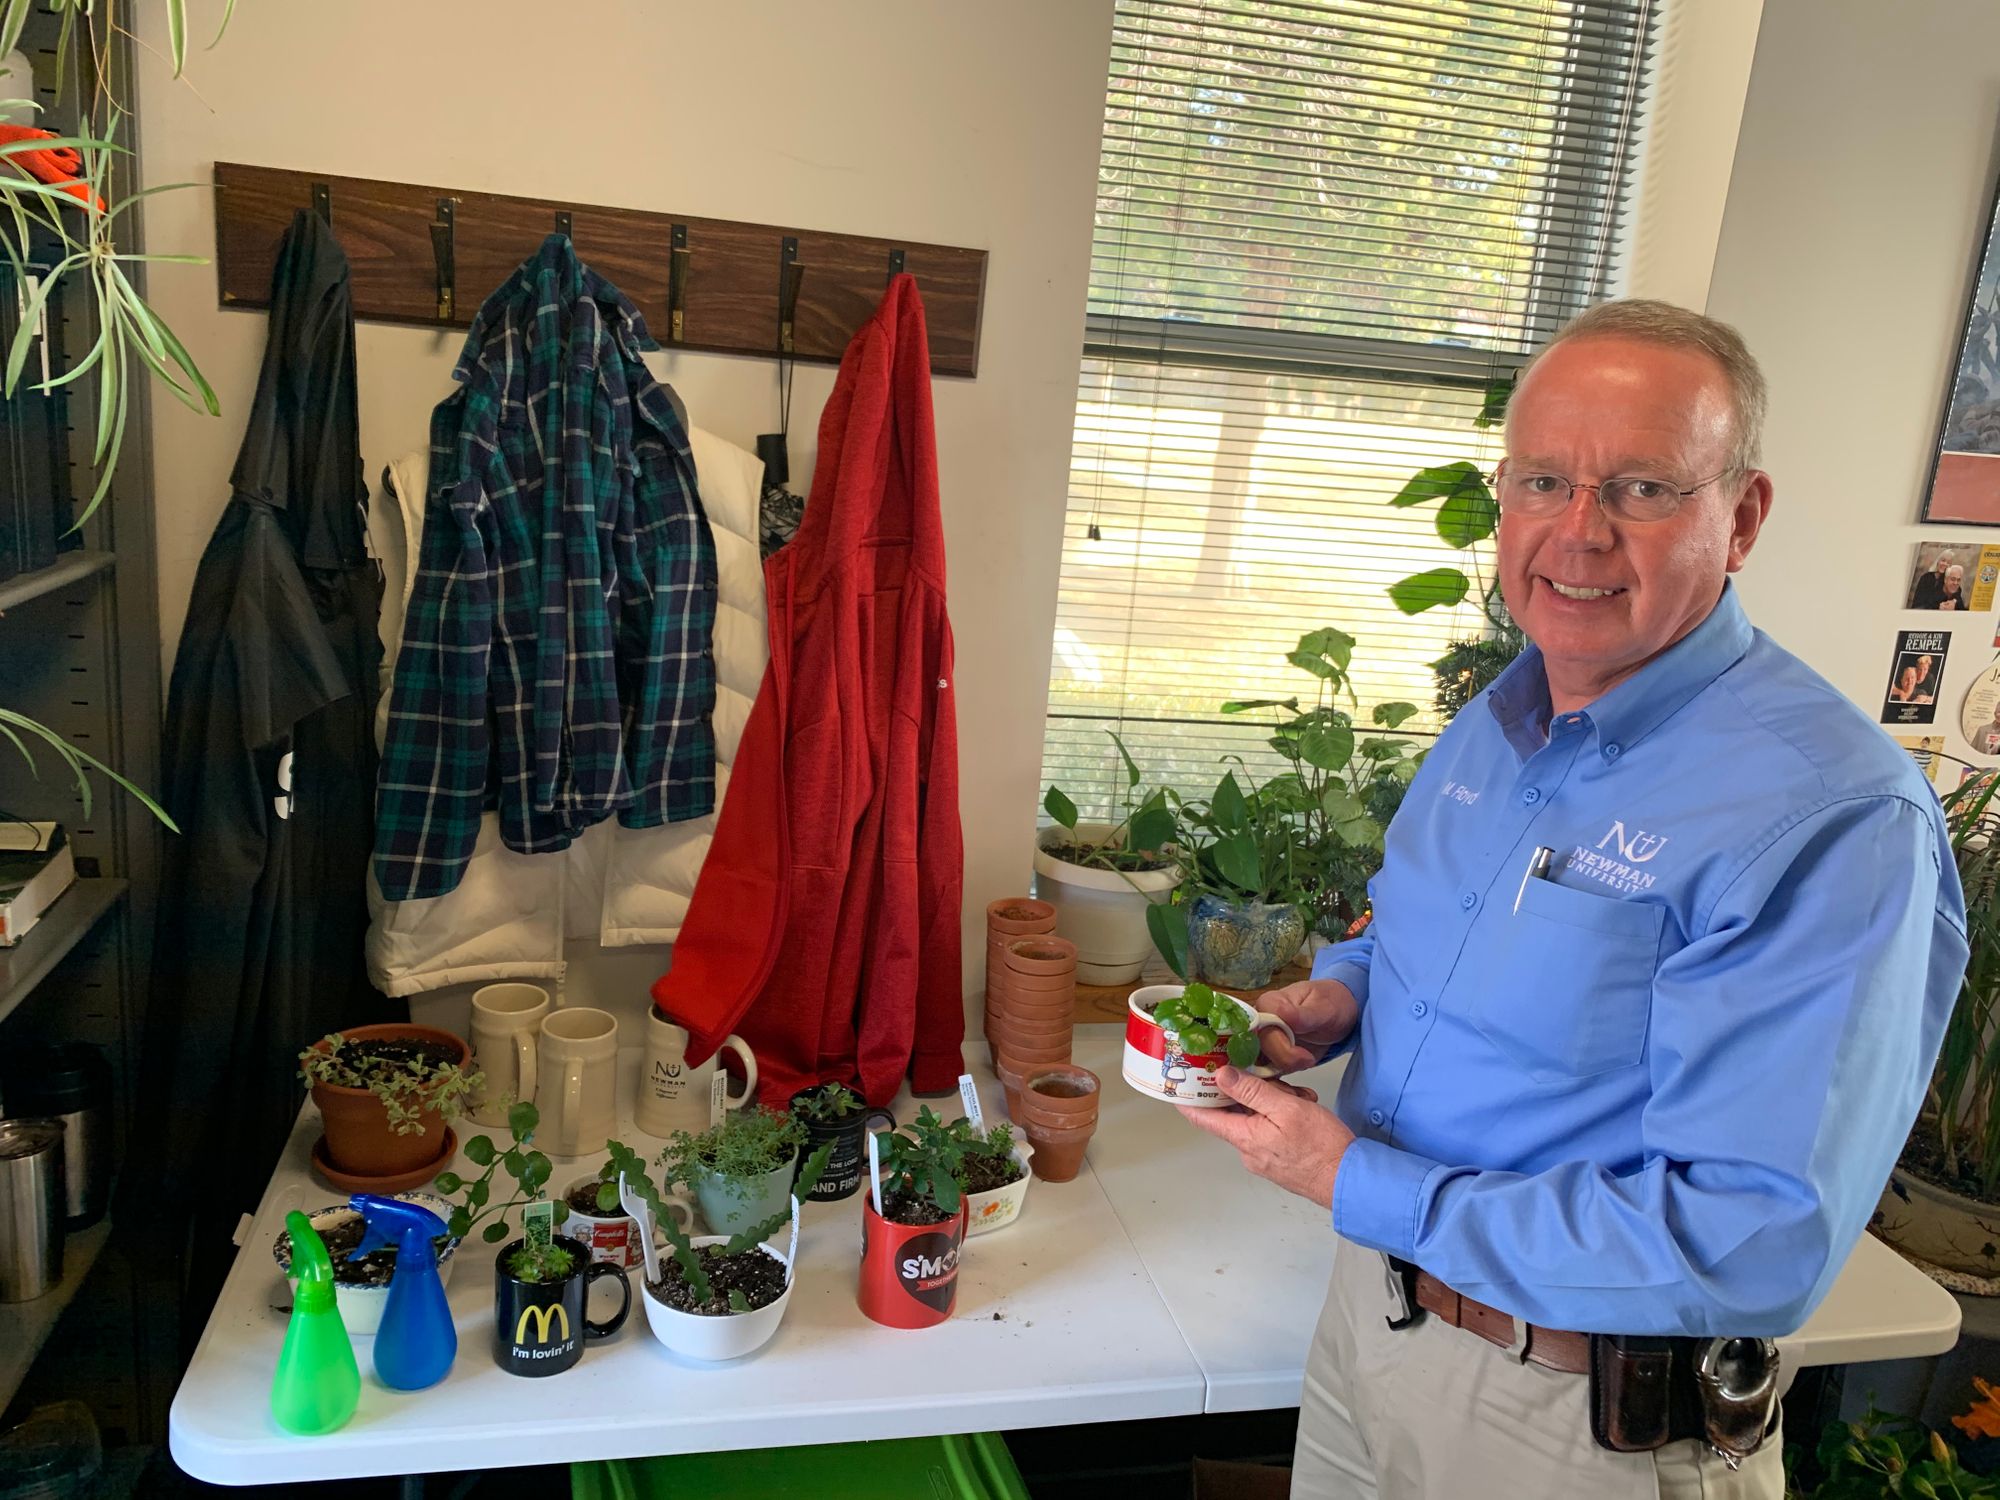 Floyd shares love of plants with community